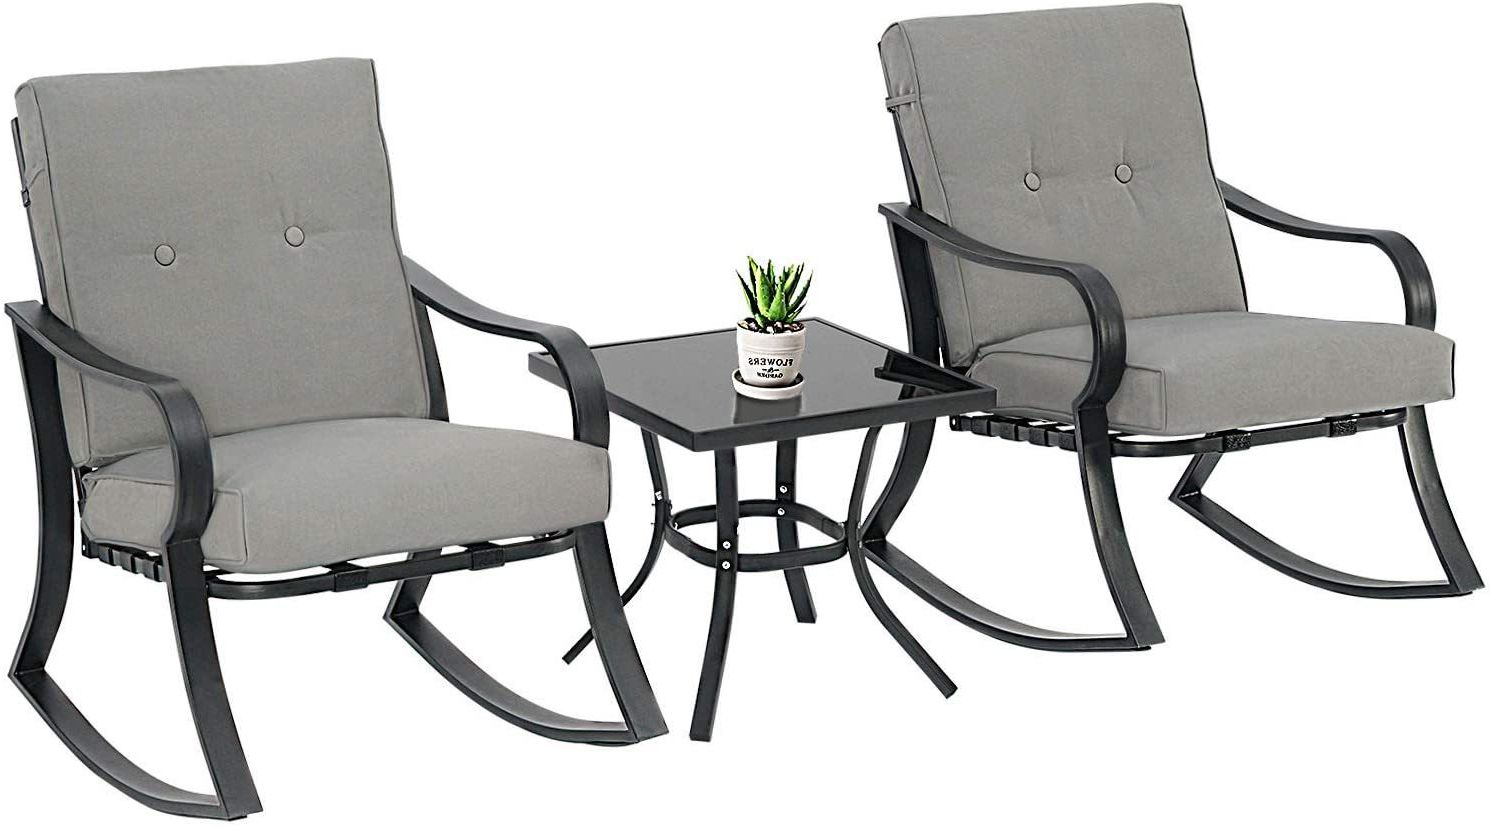 Gray Wash Wood Porch Patio Chairs Sets Intended For Well Known Classic Brands 3 Piece Outdoor Rocking Chairs Bistro Set Black Steel (View 1 of 15)